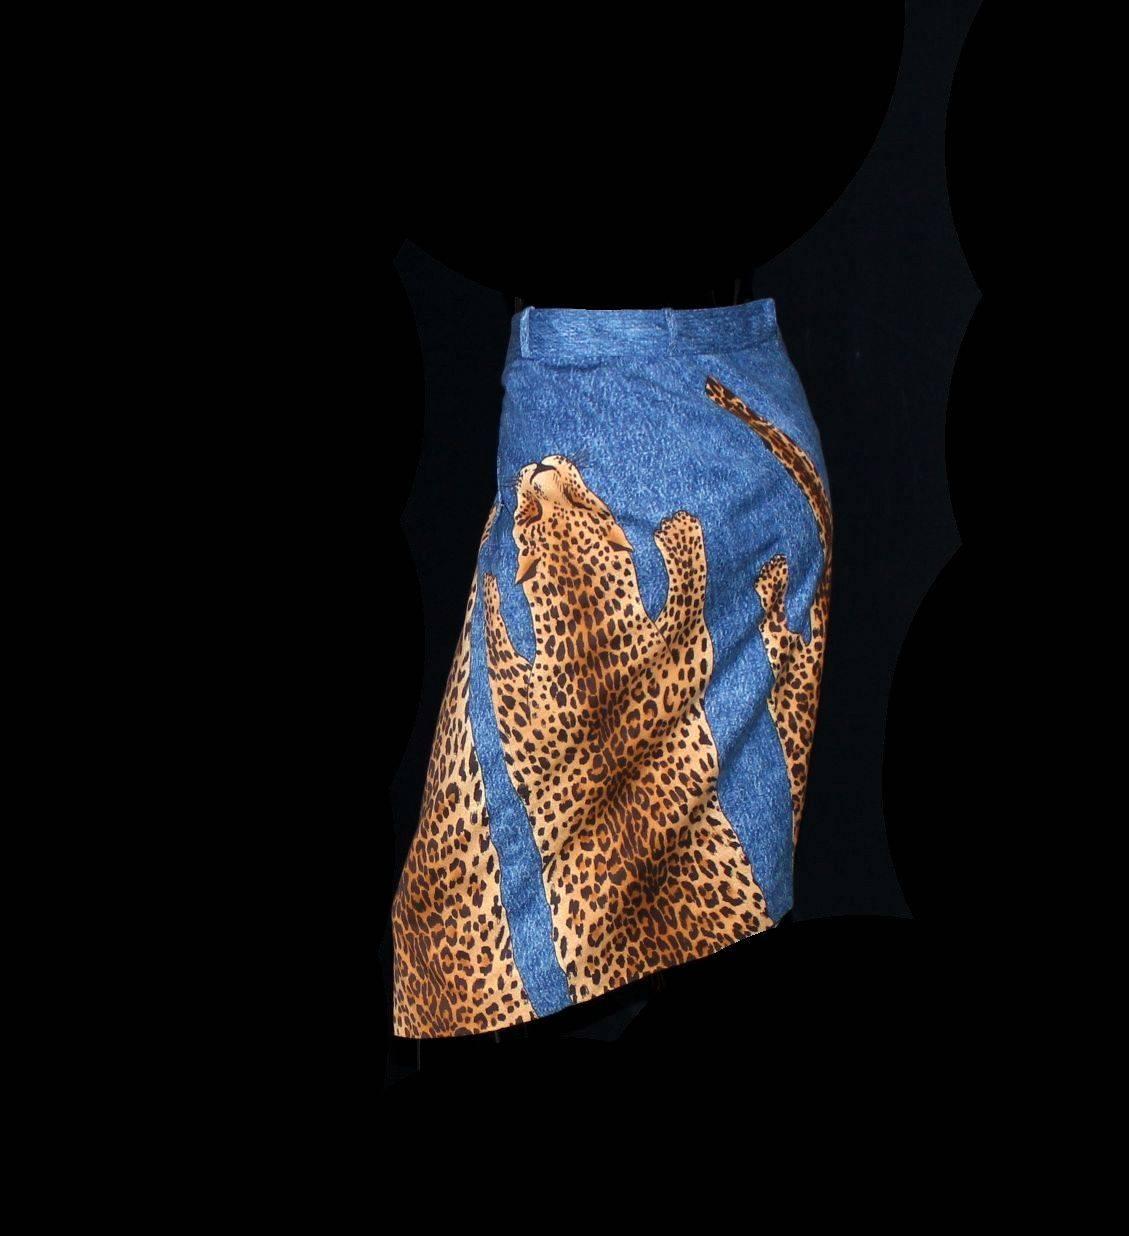 Stunning Christian Dior skirt
Designed by John Galliano for the Dior SS 2000 collection
Beautiful asymmetic design with leopards climbing up 
Decorative push buttons engraved with "Christian Dior"
An out-of-the-ordinary piece designed by